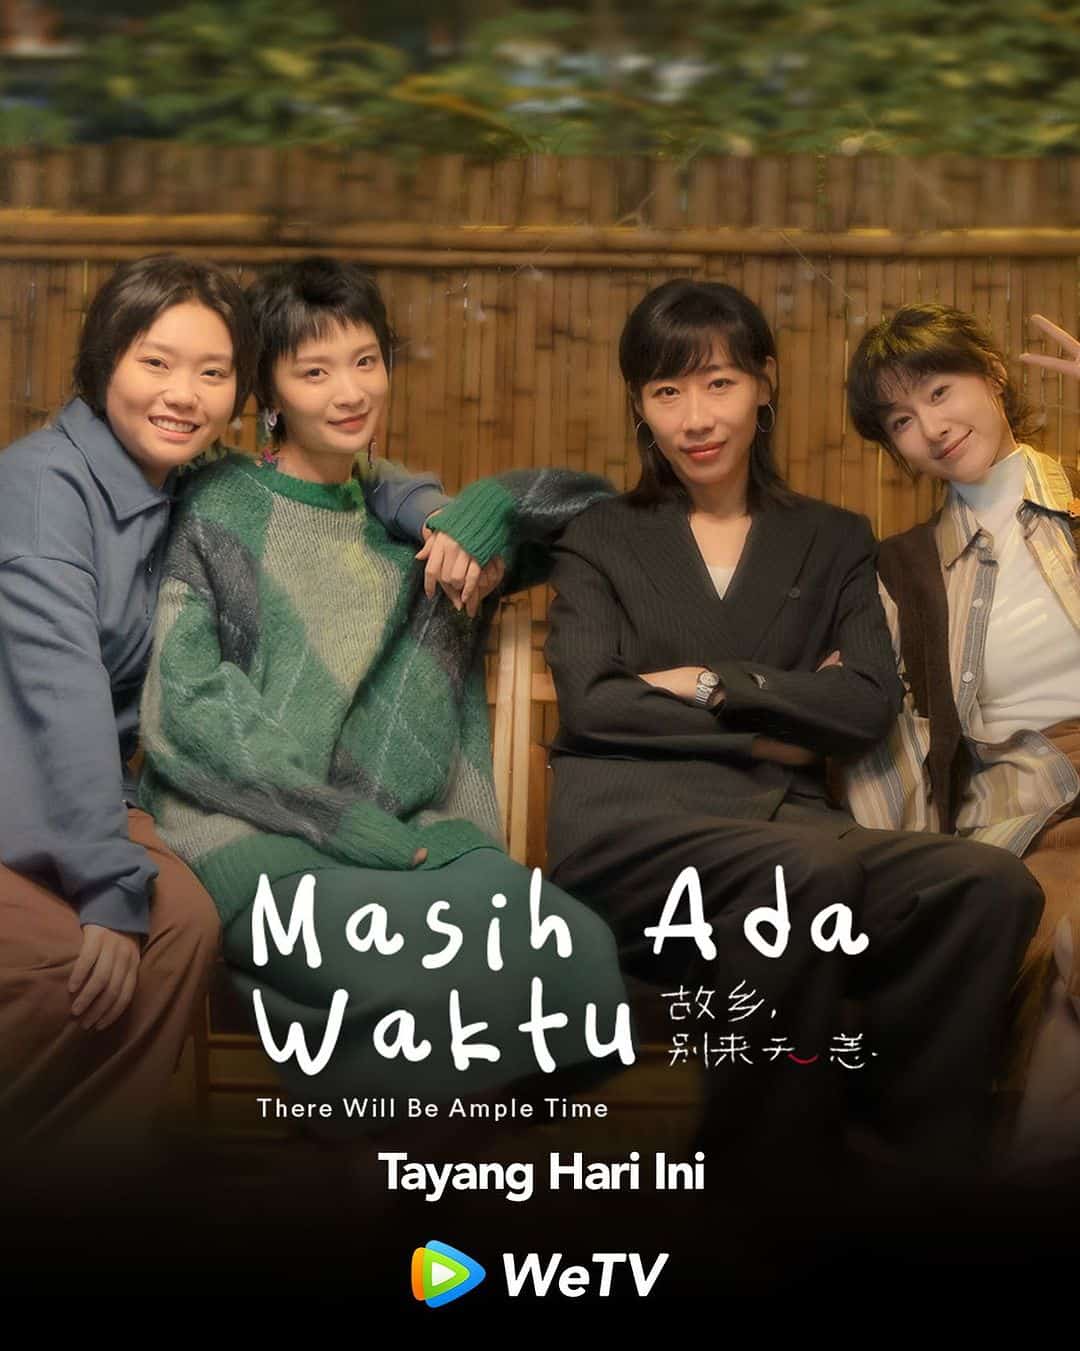 There Will Be Ample - Sinopsis, Pemain, OST, Episode, Review